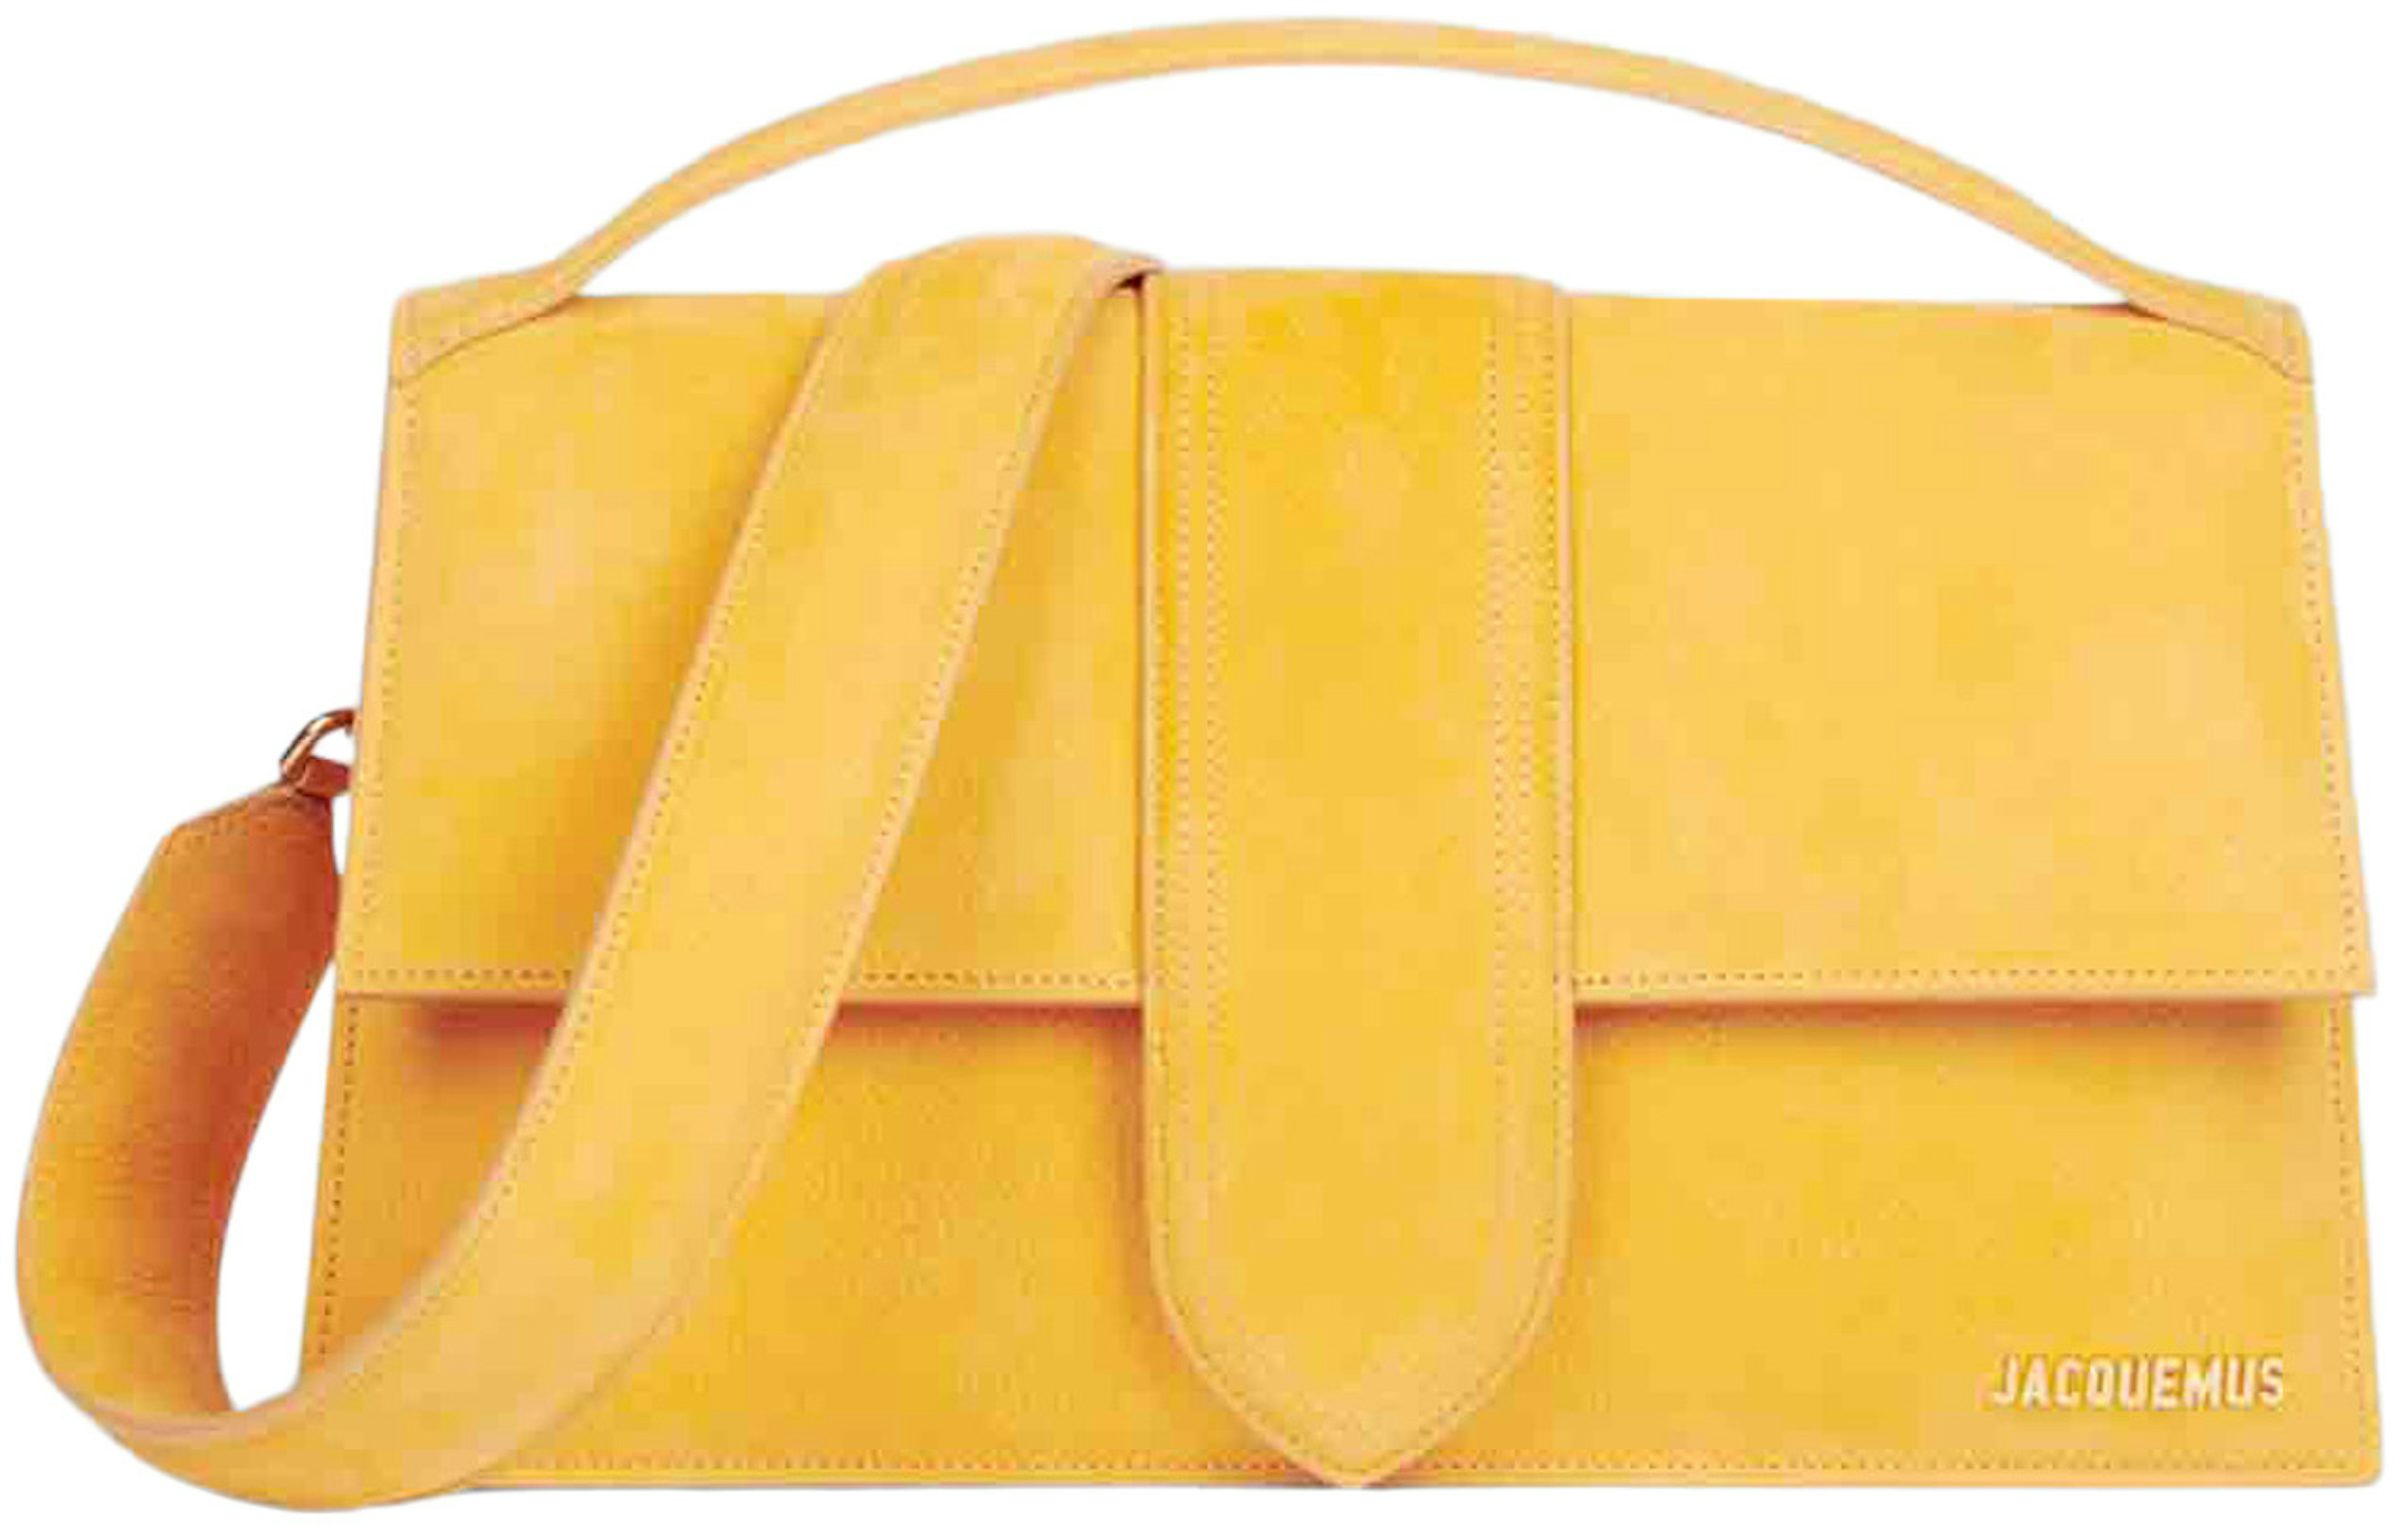 Jacquemus Chiquito Bag In Yellow Suede. Comes with receipt and dust bag.